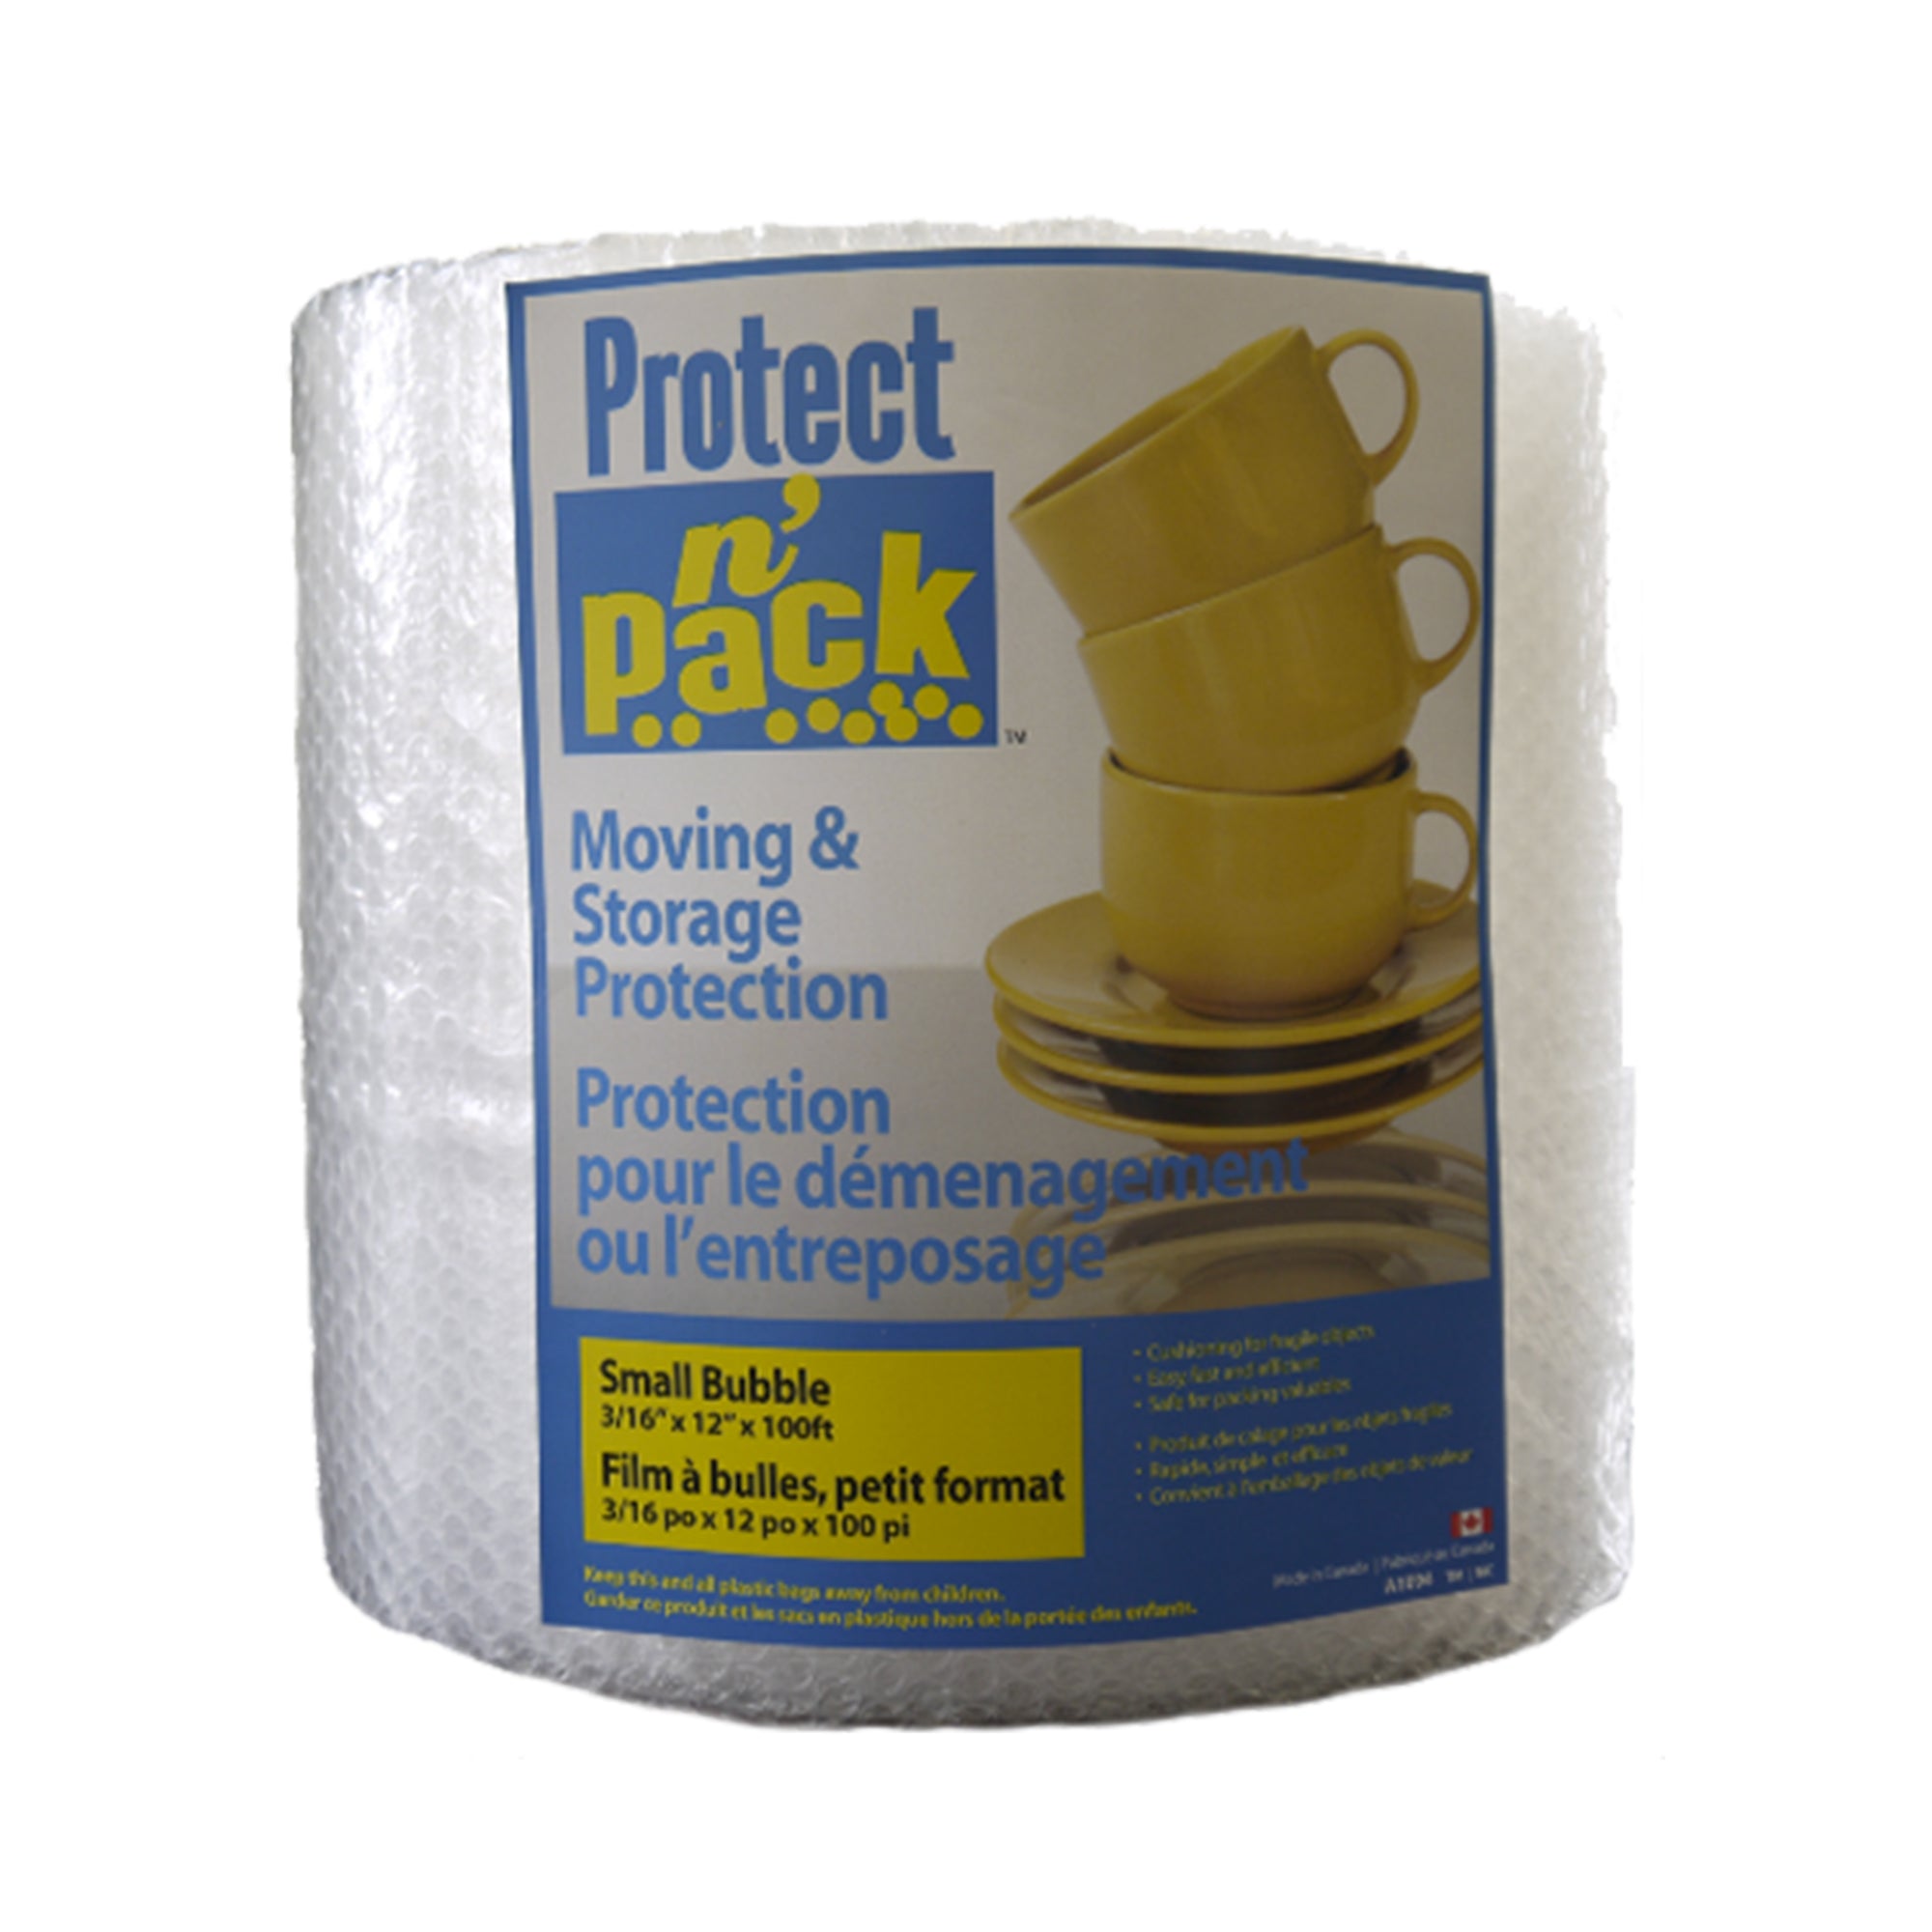 Protect n' Pack Bubble Wrap Roll - Small Bubble 12in x 100ft